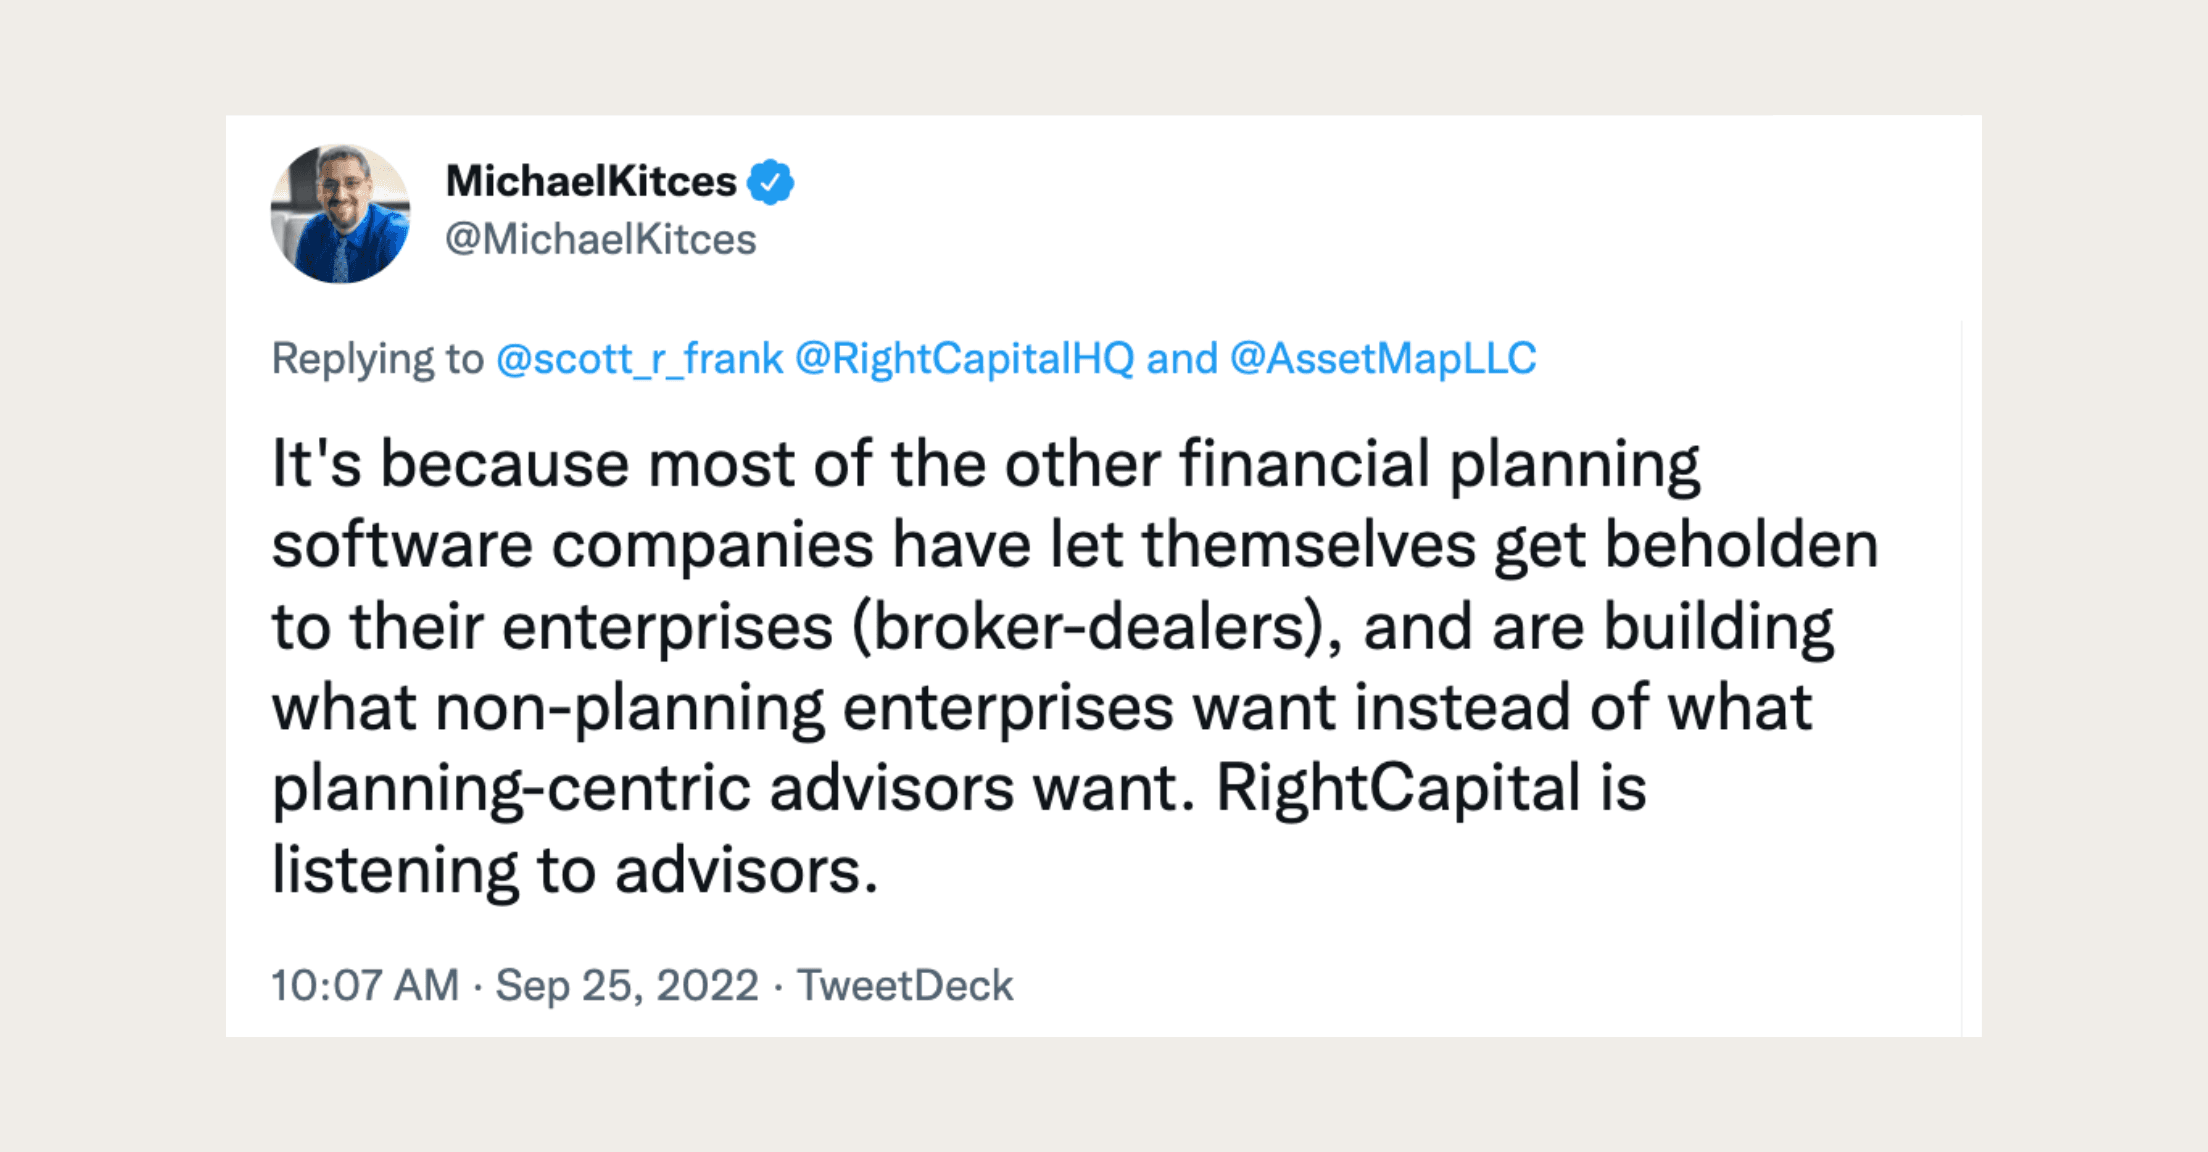 Tweet from Michael Kitces saying, "It's because most of the other financial planning software companies have let themselves get beholden to their enterprises (broker-dealers), and are building what non-planning enterprises want instead of what planning-centric advisors want. RightCapital is listening to advisors."